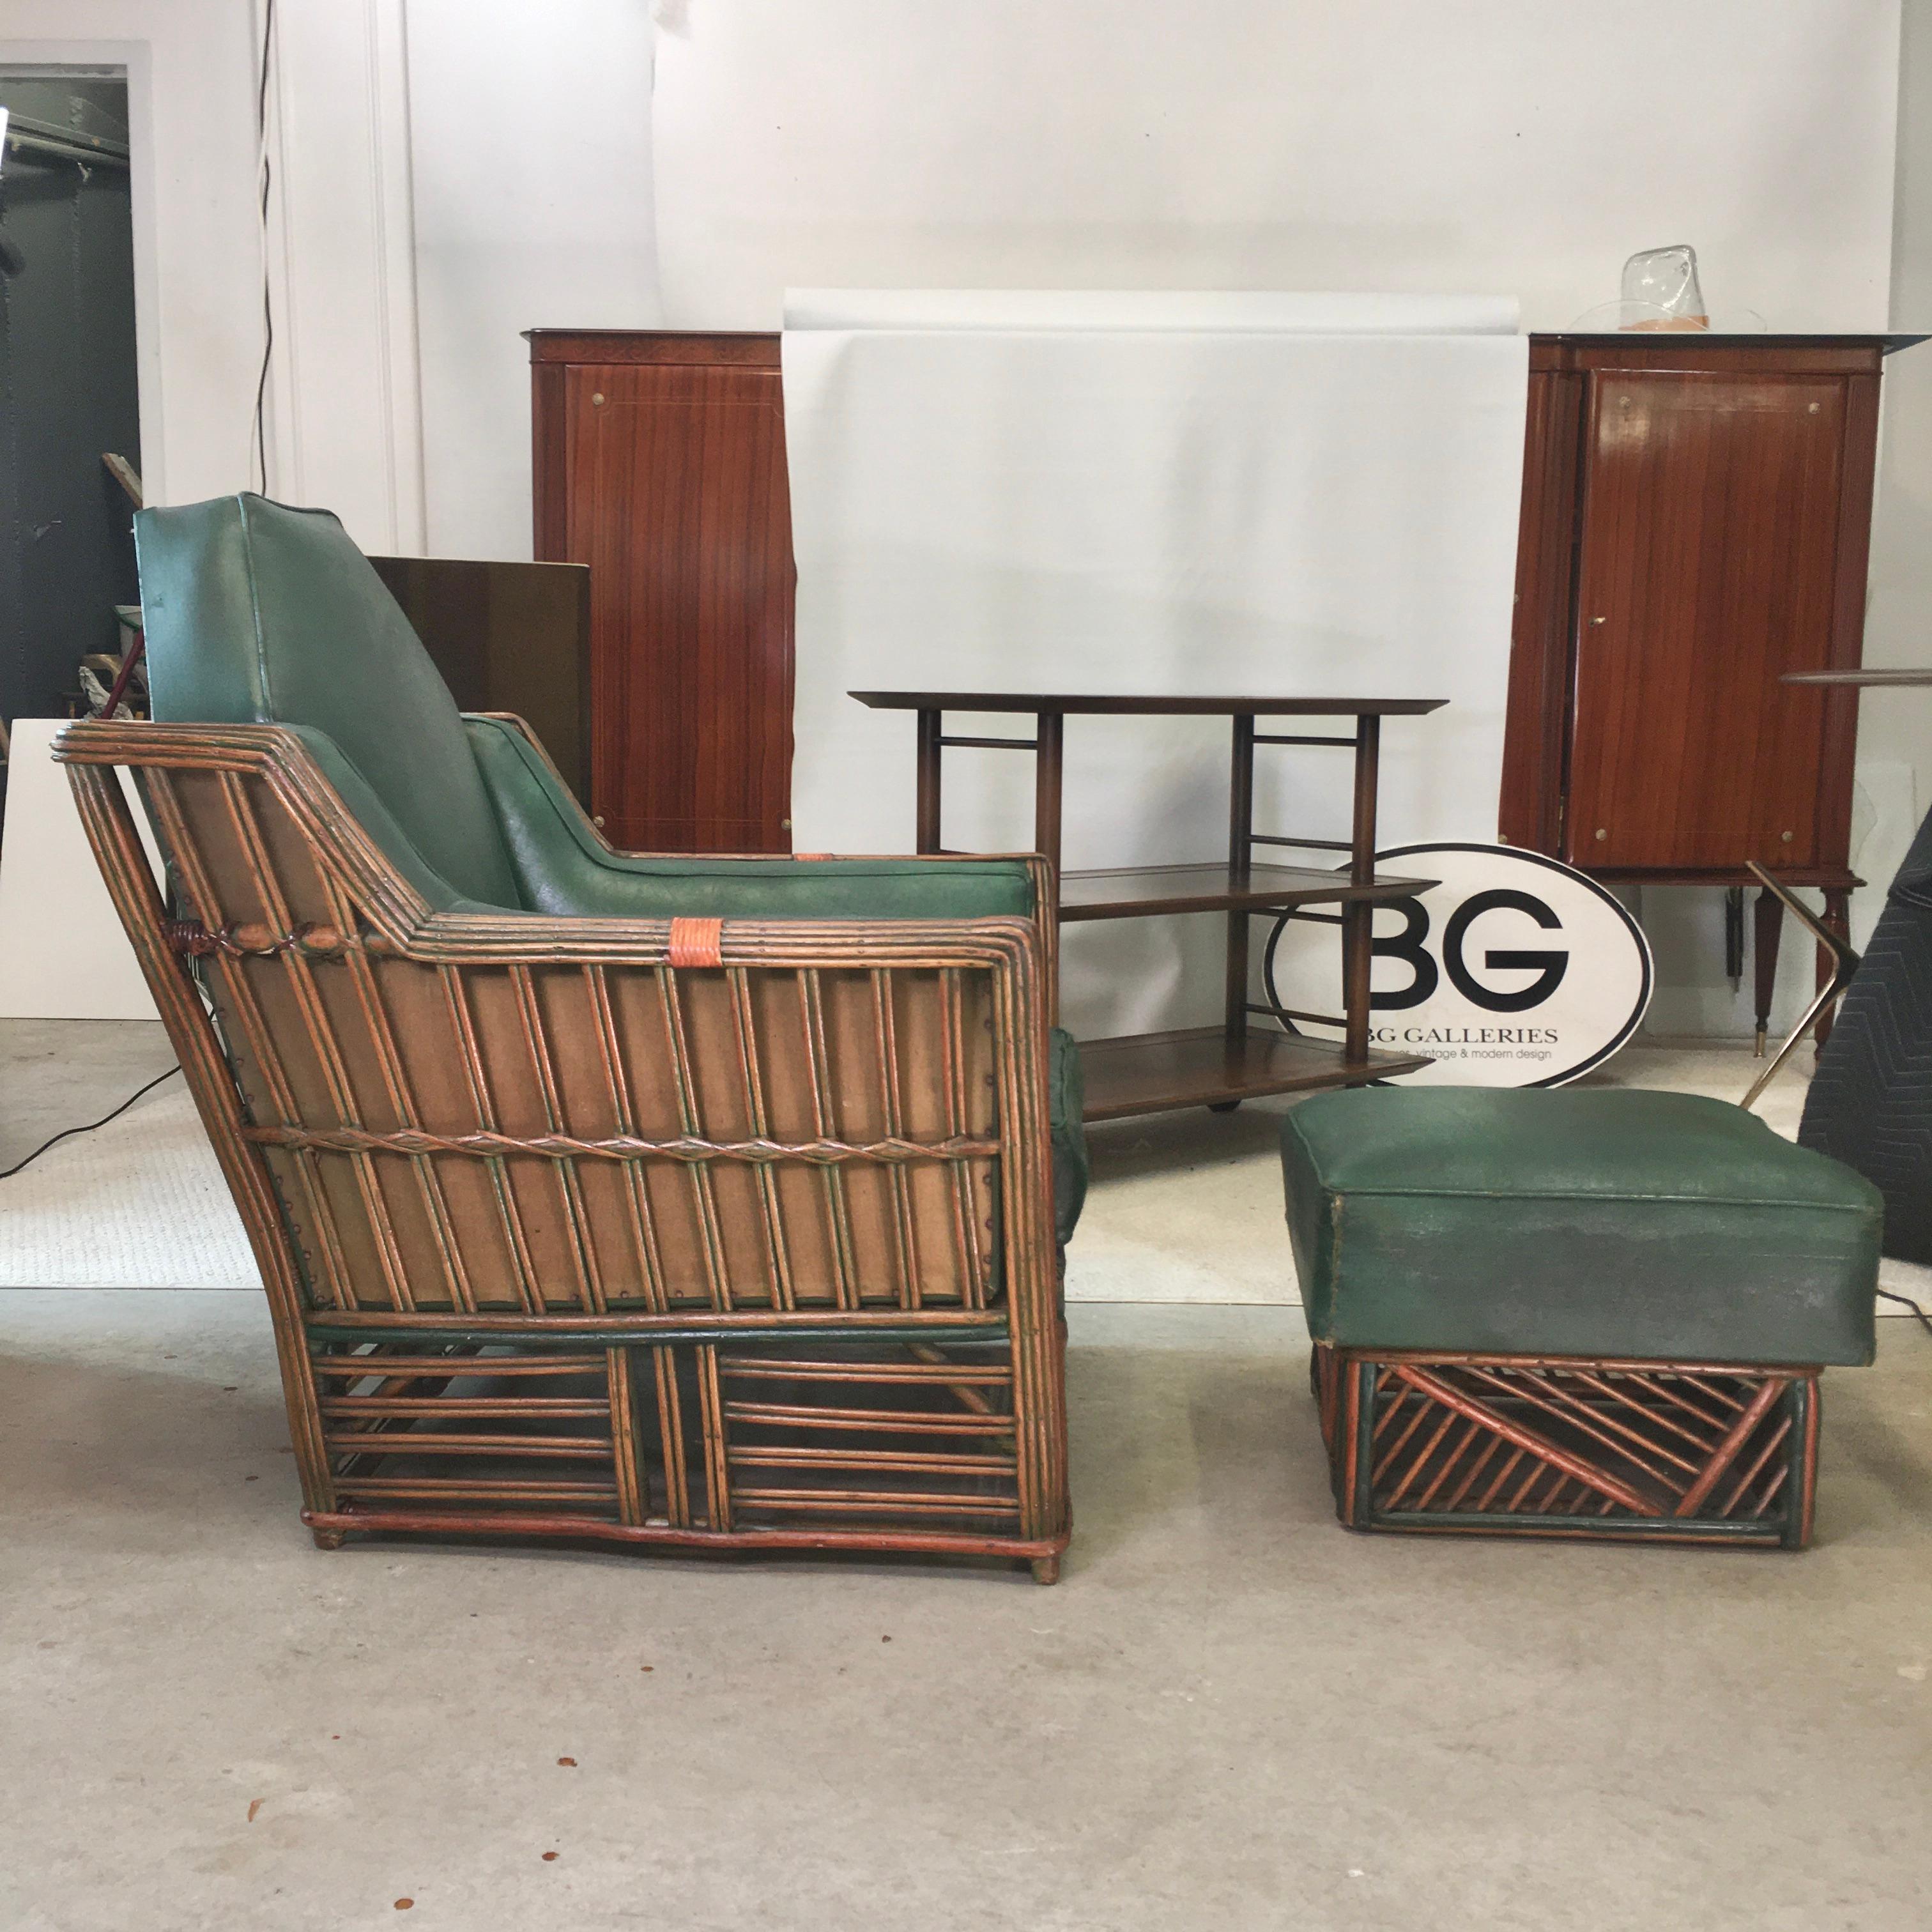 This is a grand old ocean liner from the 1920s, a stick reed rattan lounge chair and ottoman with their original forrest green oilcloth upholstered cushions.
Extraordinary geometric design, particularly the tombstone shaped back cushion, straddling